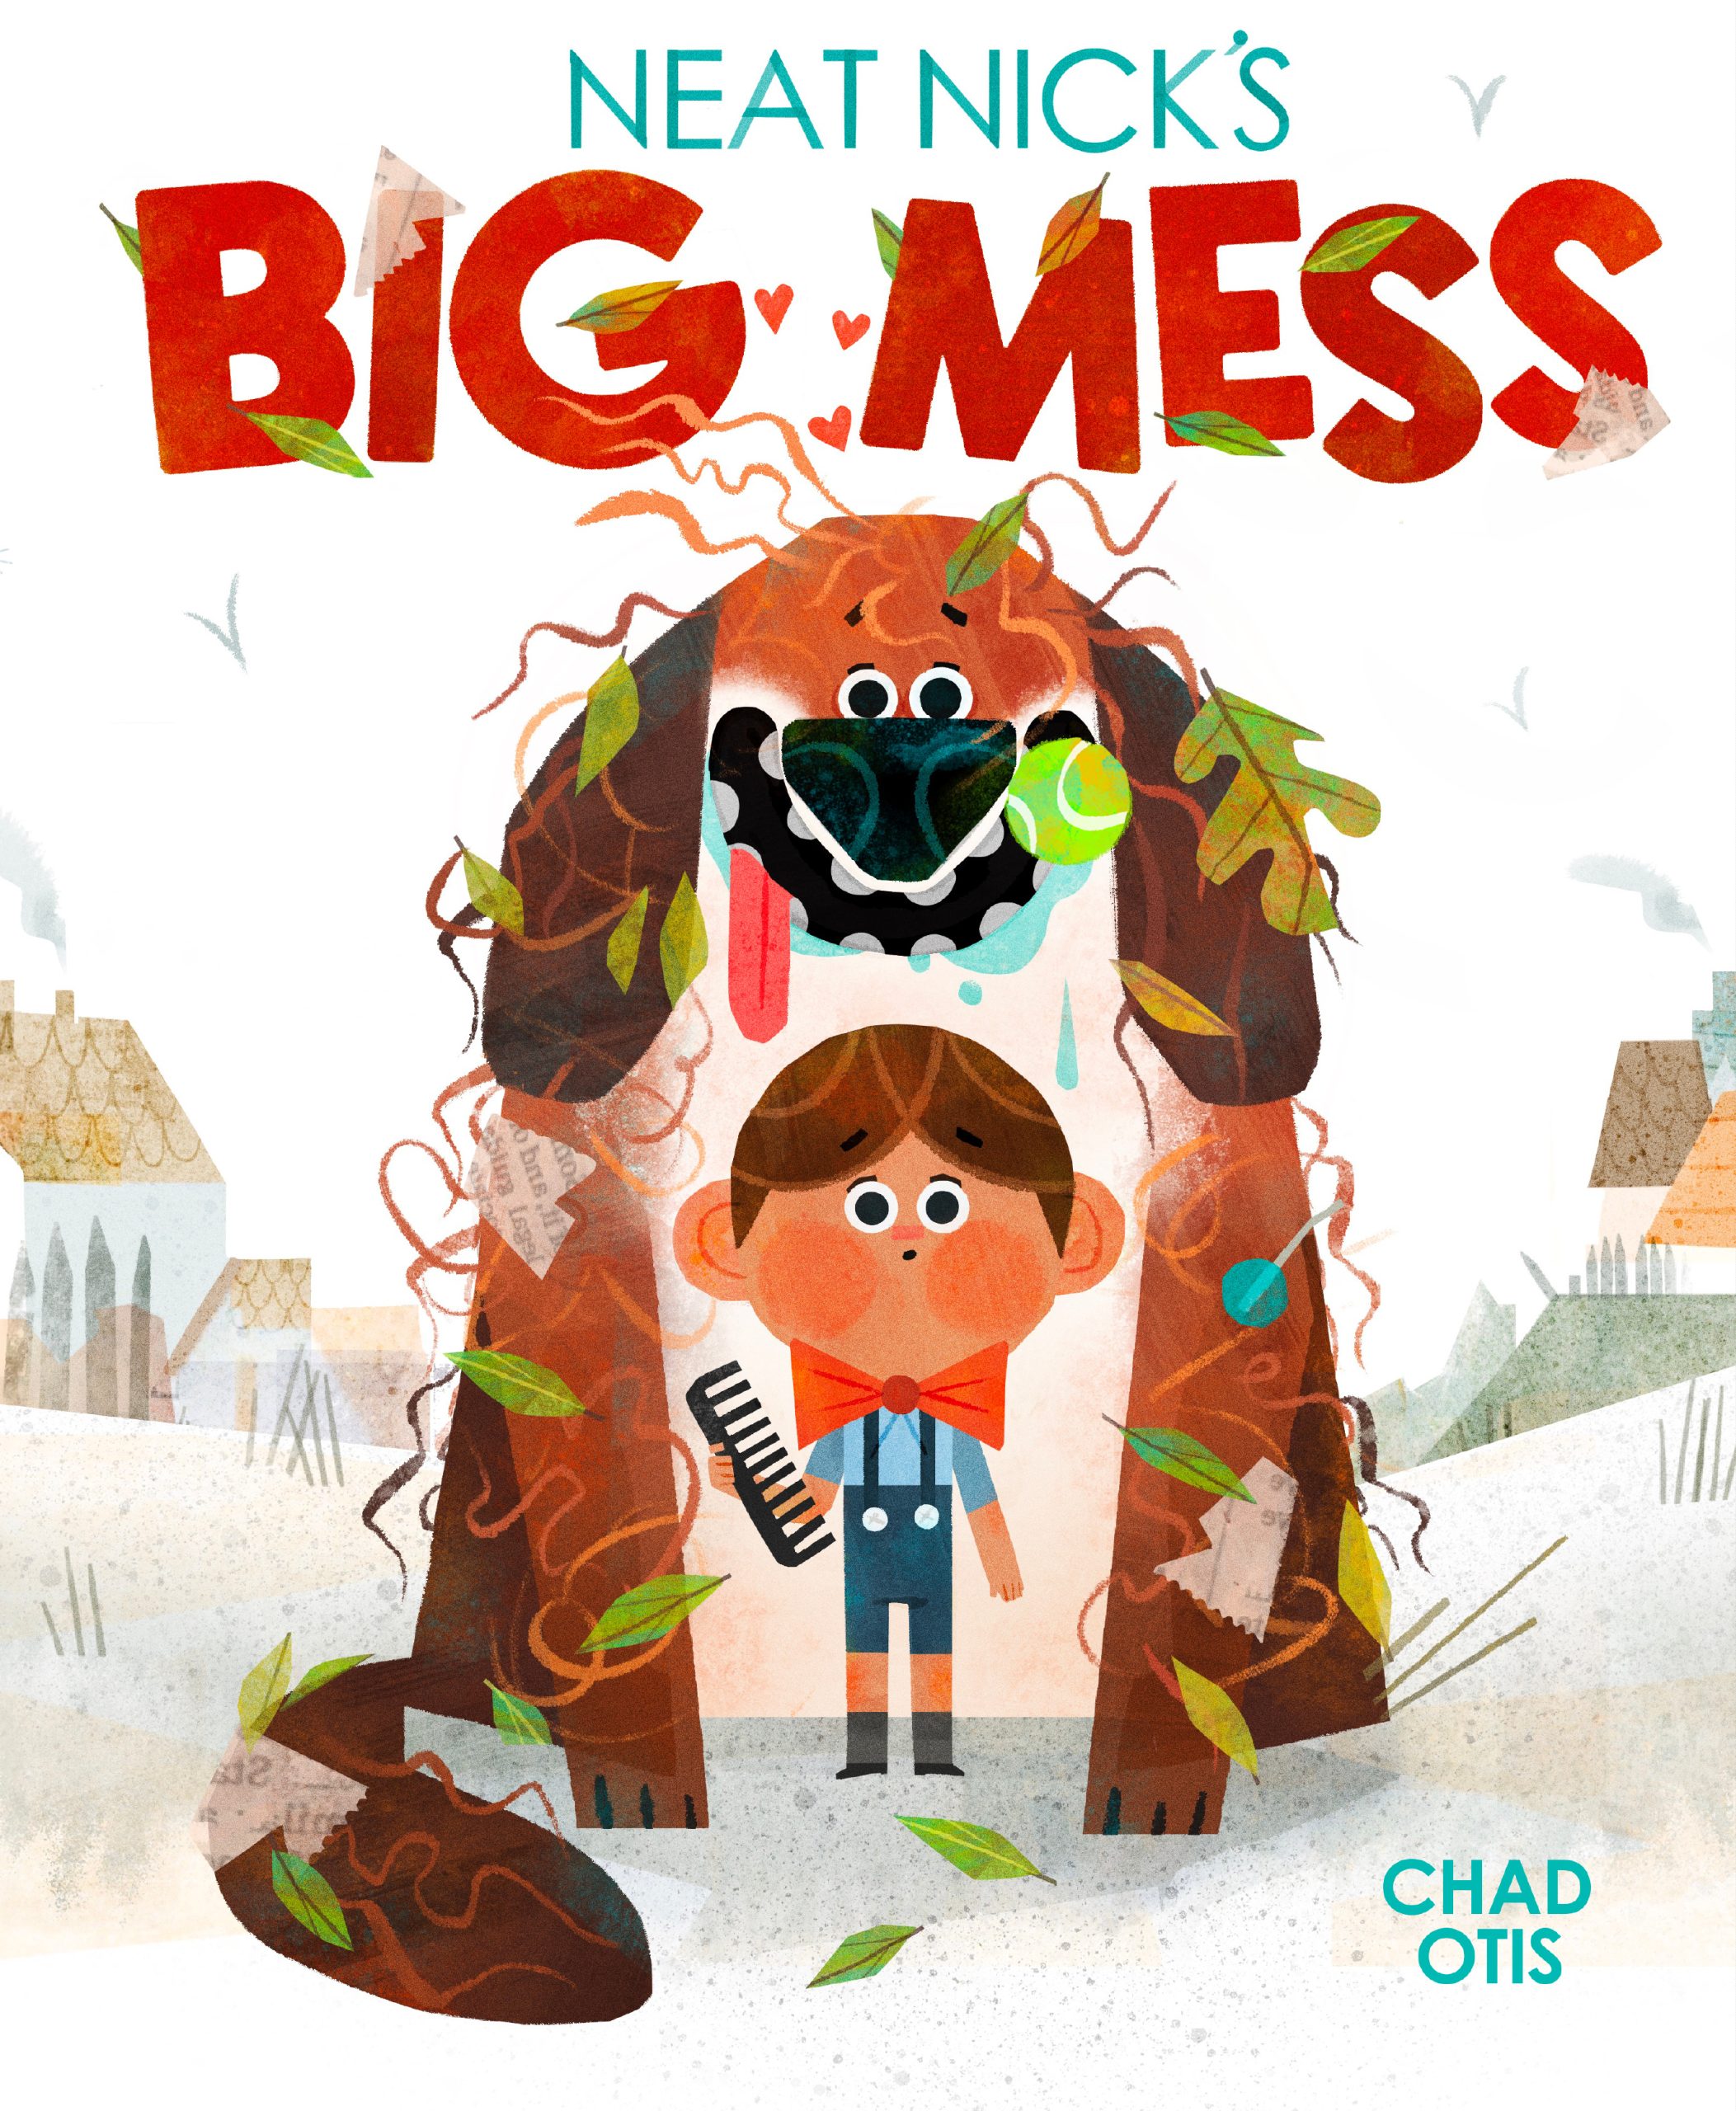 Author Chat with Chad Otis (Neat Nick’s Big Mess), Plus Giveaway! ~ US ONLY!